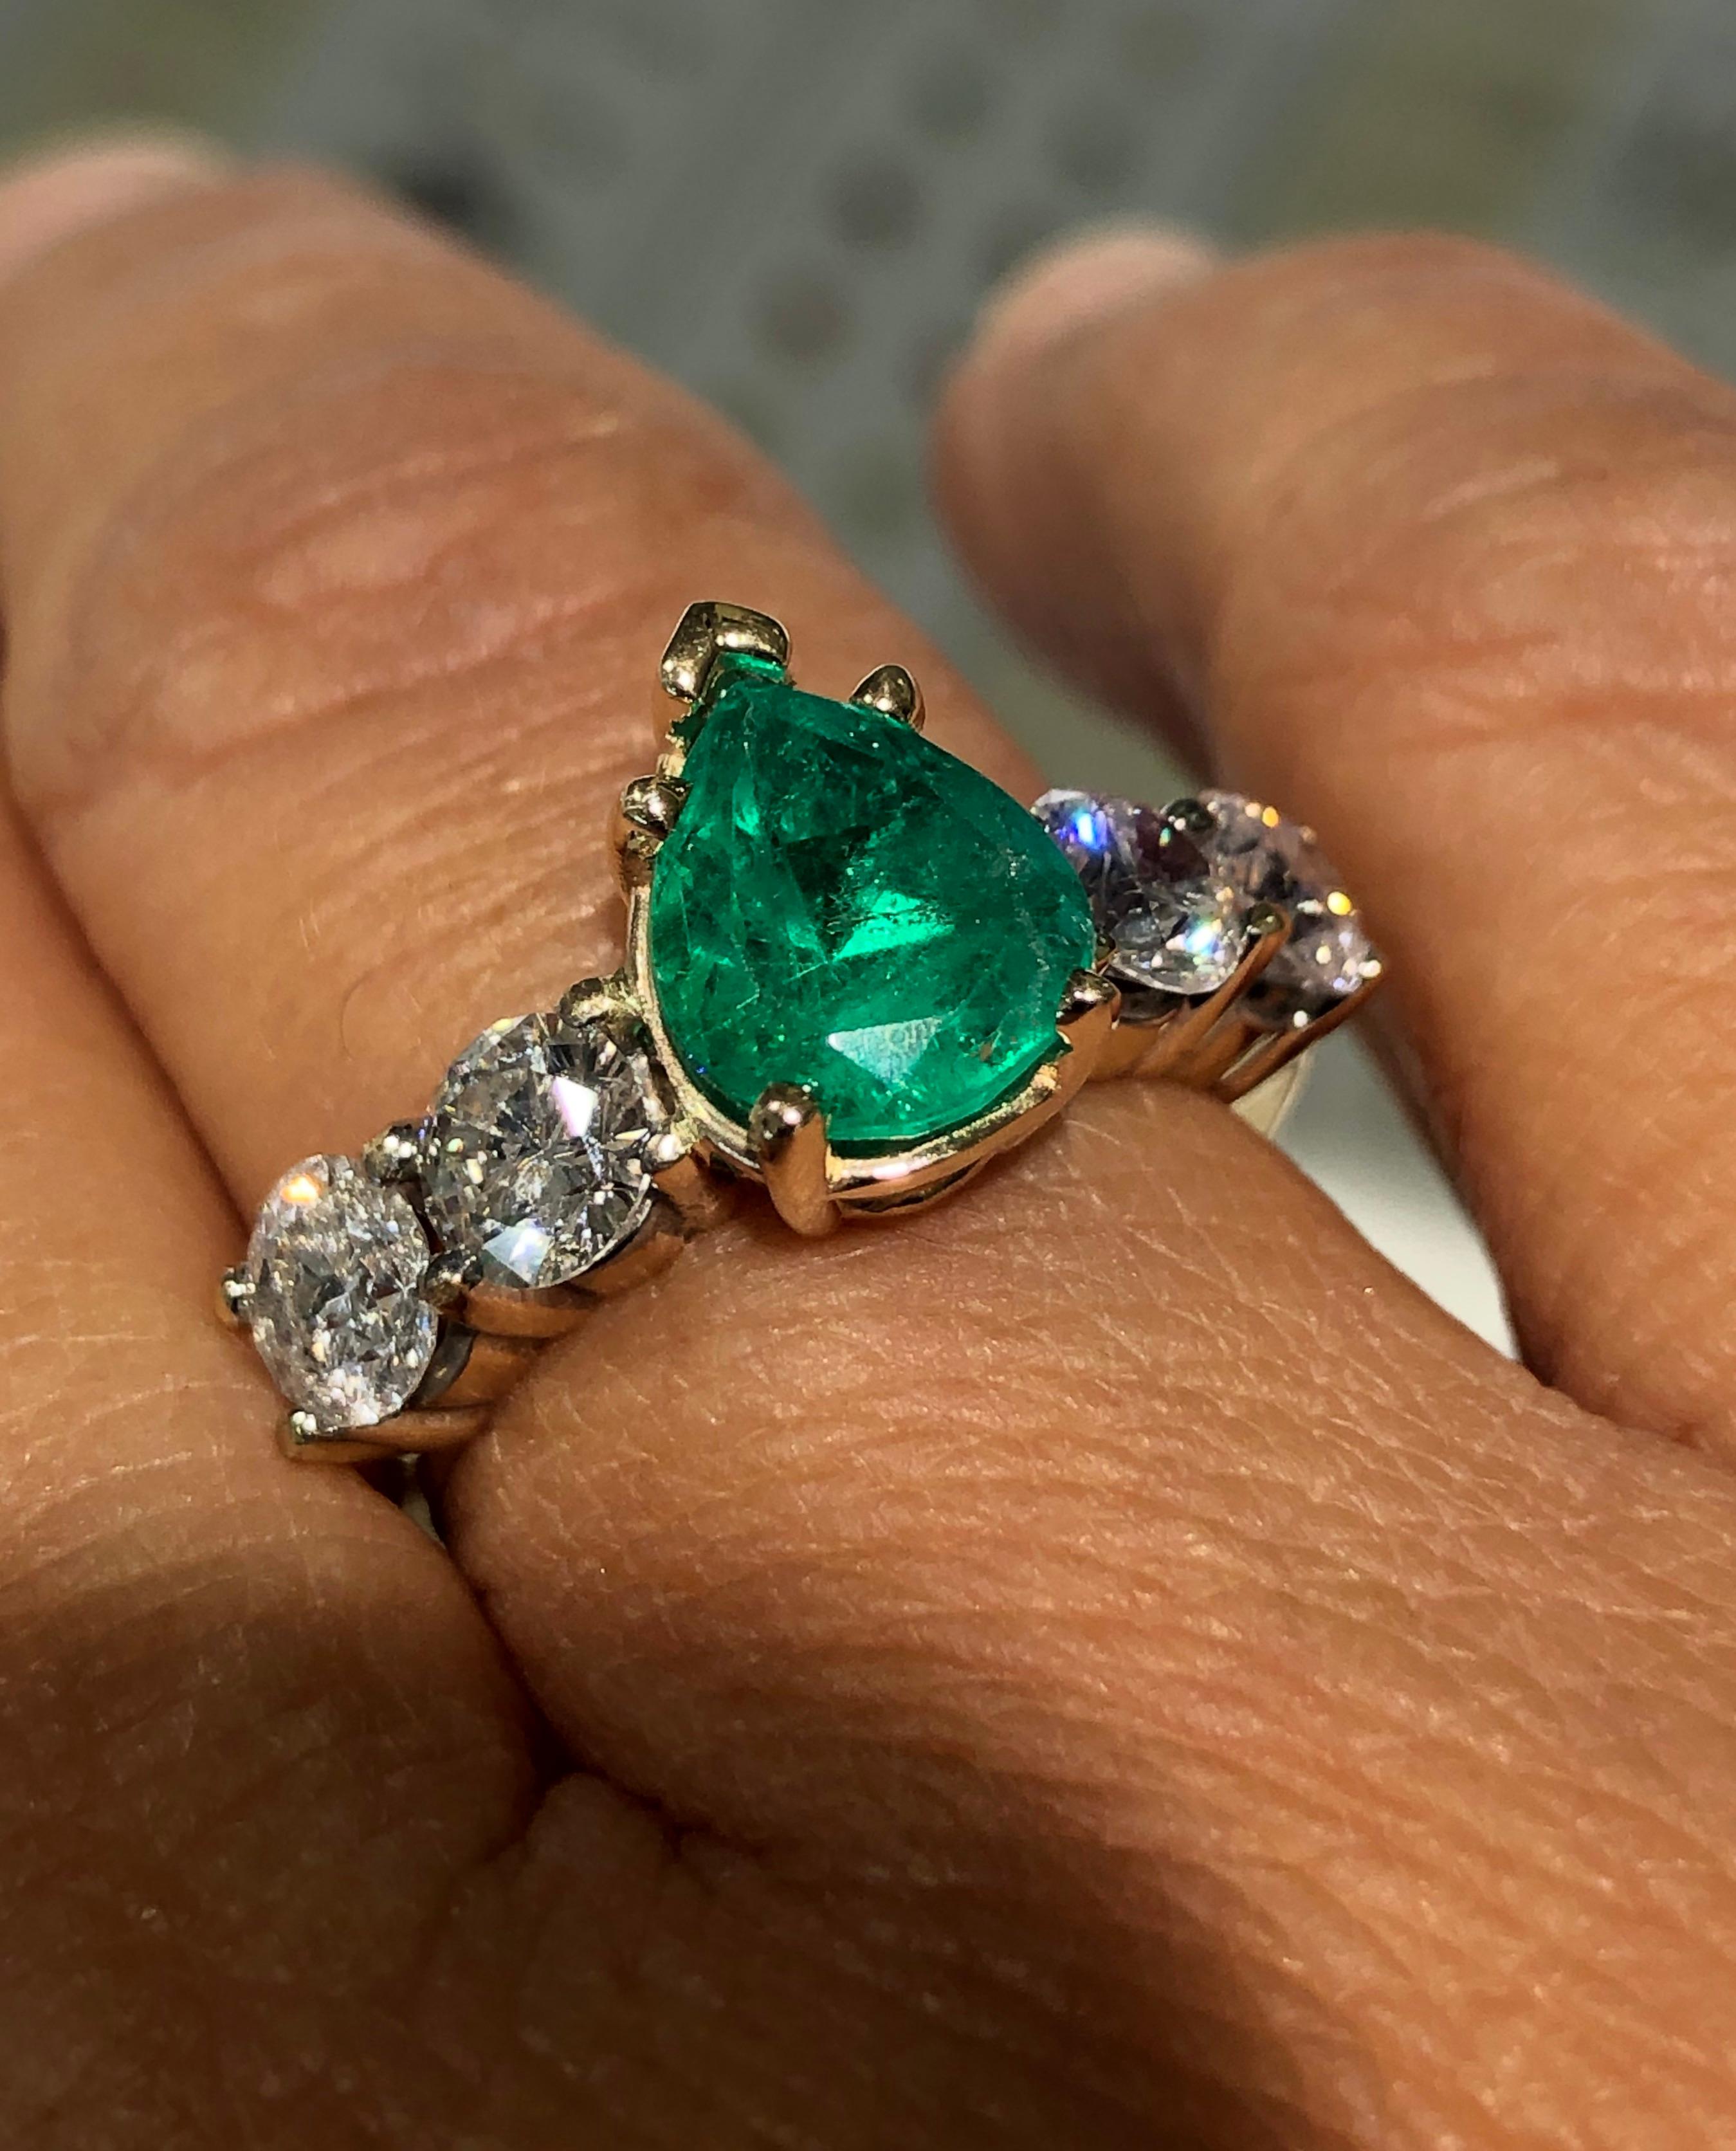 Estate Natural Colombian Emerald and Round Brilliant Cut Diamond Engagement Ring 14K Yellow Gold 
Natural Colombian Emerald, Pear Cut, Color/Clarity: Medium Green/ Clarity VS. Total Emerald Weight: 2.06 carat
Second Stone: Four Diamonds Round